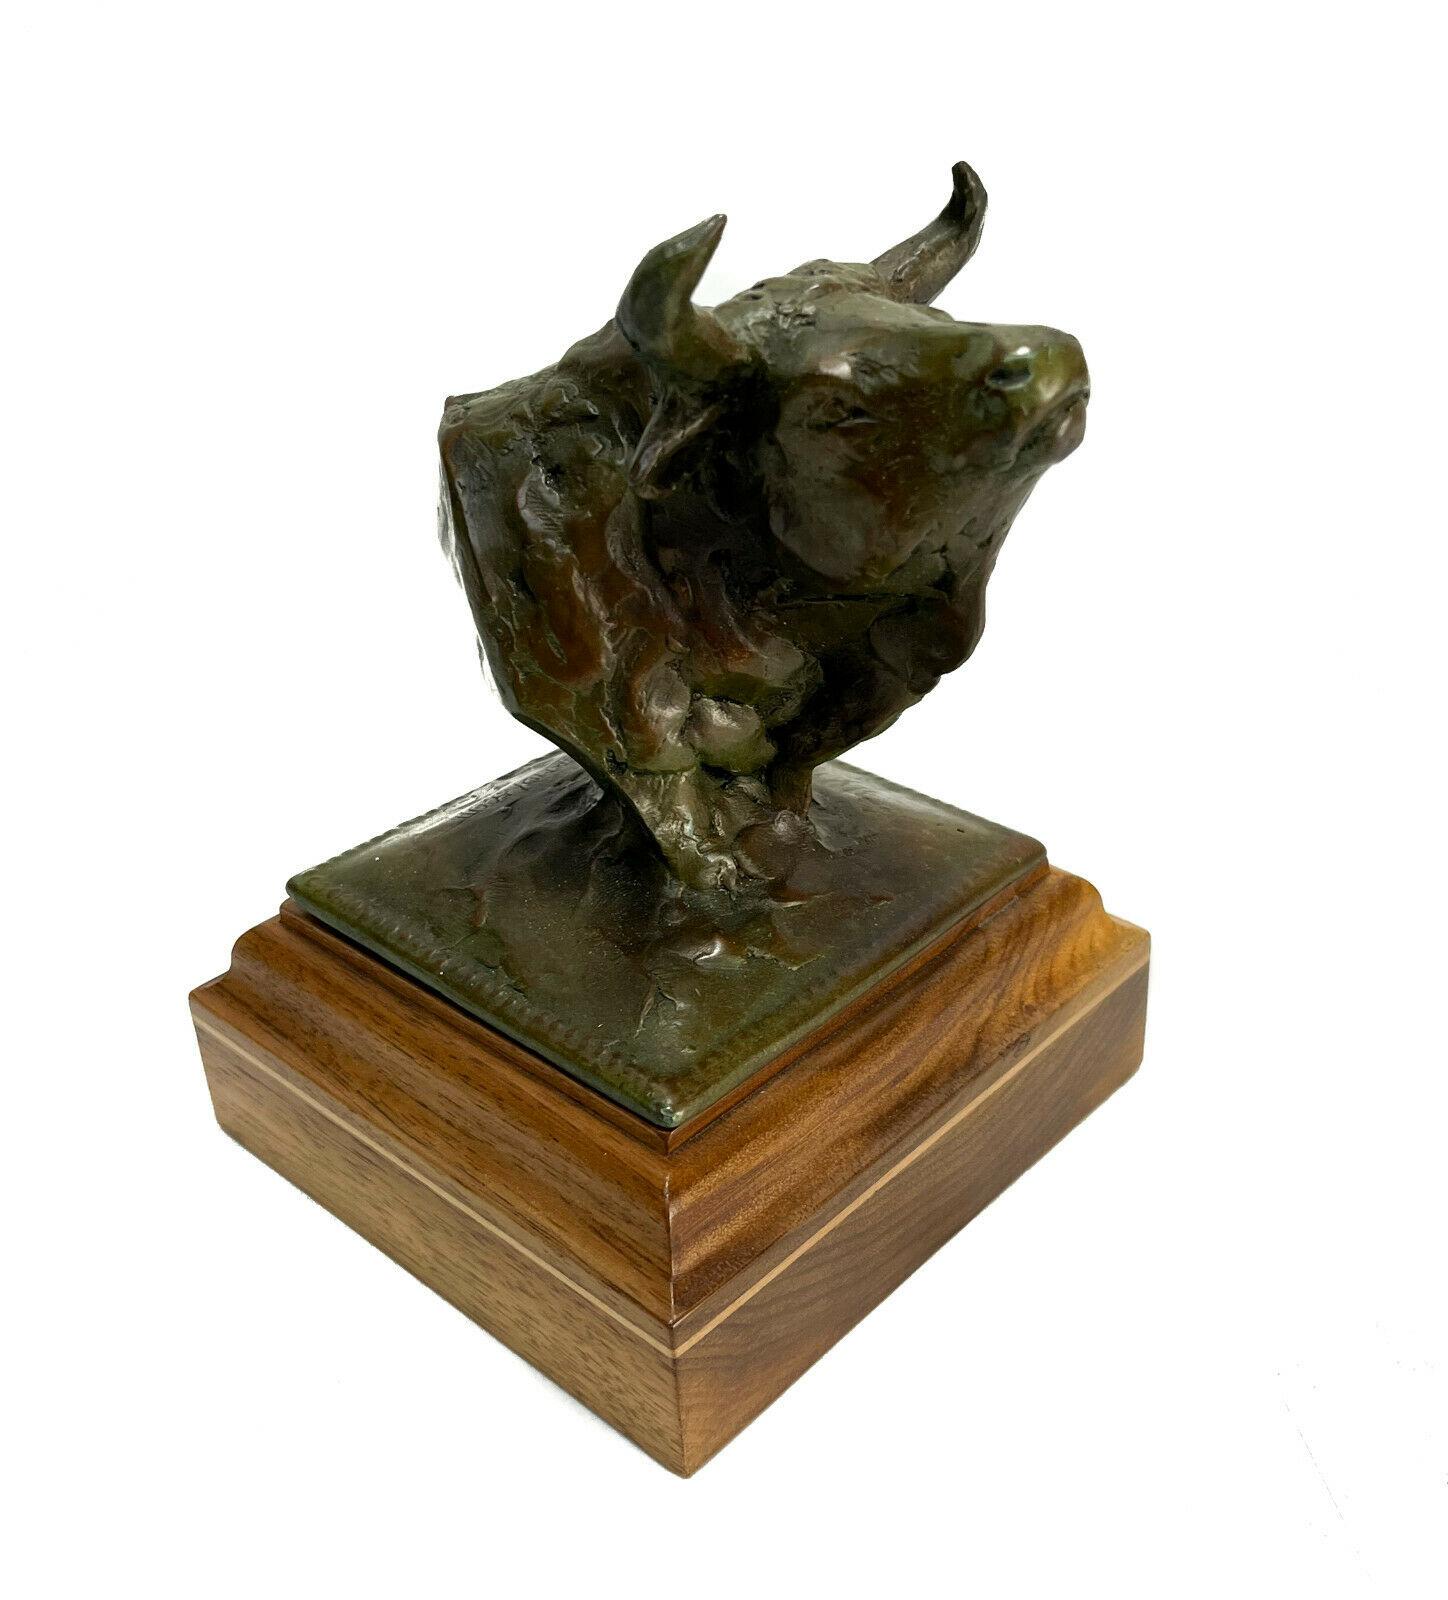 Sandy Scott (American 20th century) patinated bronze bust sculpture of a Steer Head. Limited edition of 100 and signed to the base. With wooden base, but not permanently attached.

Additional information:
Material: bronze 
Object type: steer